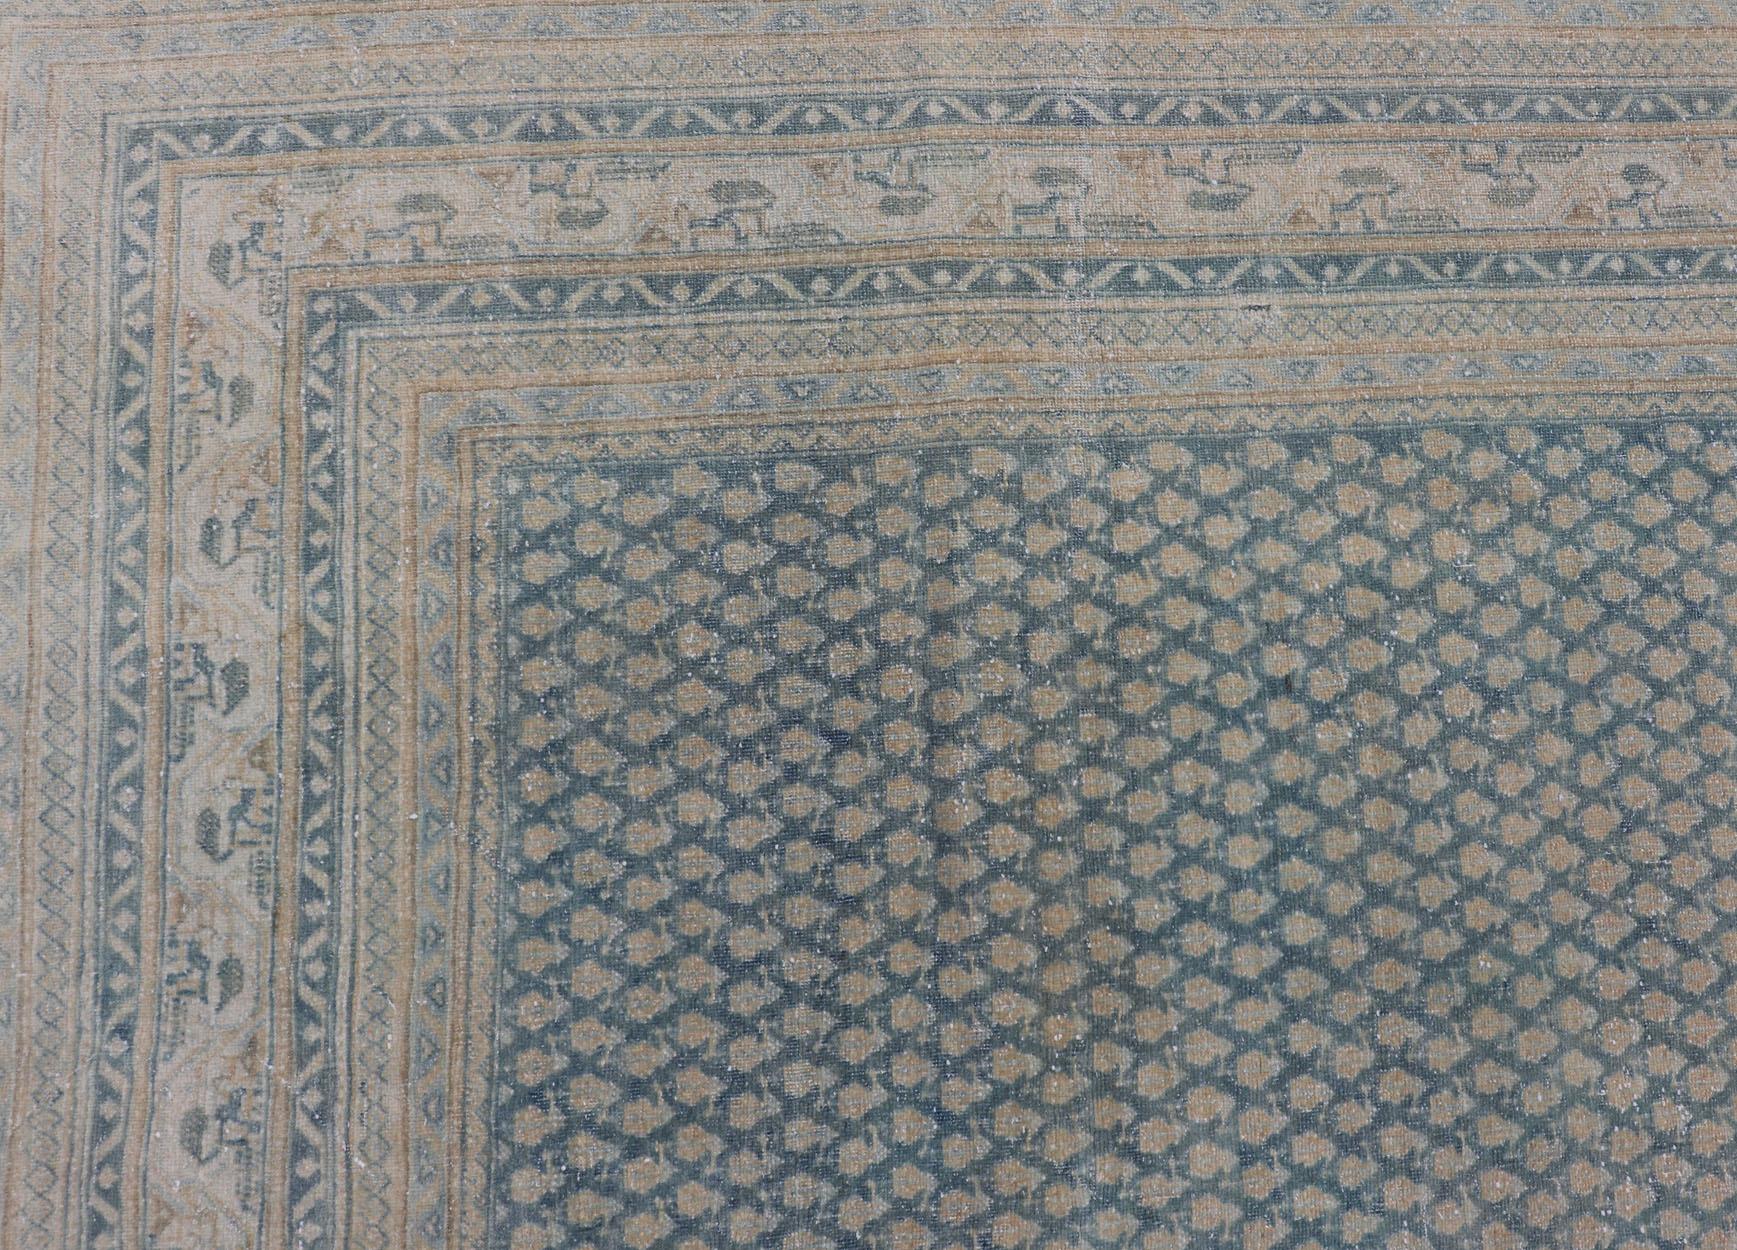 This Tabriz rug features a relatively intricate and detailed border area and an entirely sparse and small repeating tribal motif in the center field. The tones of this charming carpet only enhance the patina, with the softer creams and light blues